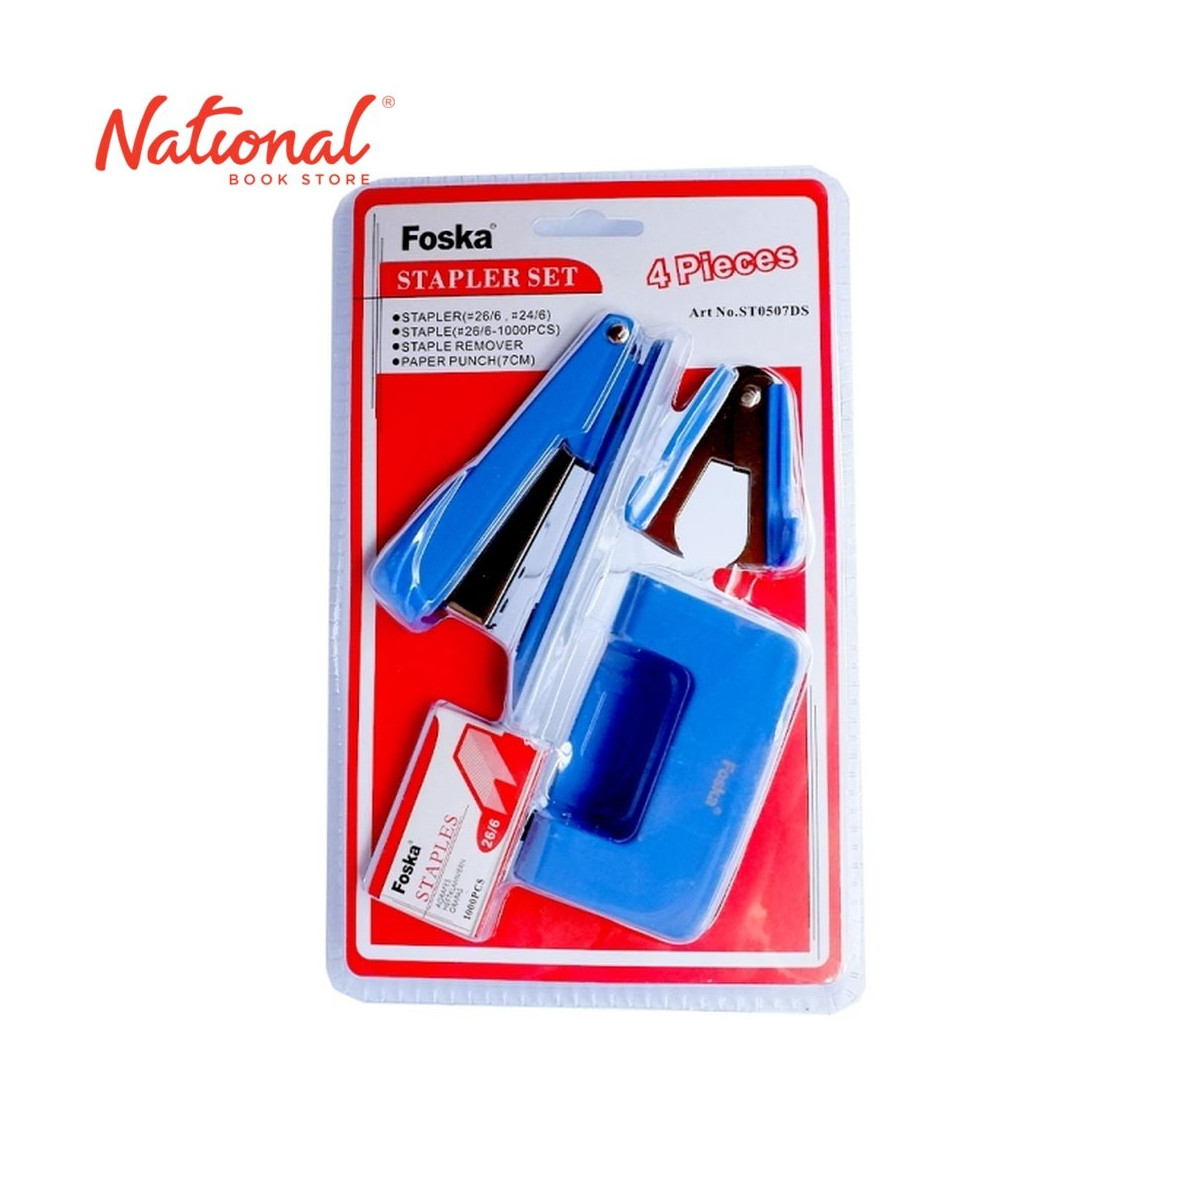 FOSKA STAPLER SET NO.35 ST0507D WITH PUNCHER REMOVER & WIRE, BLUE